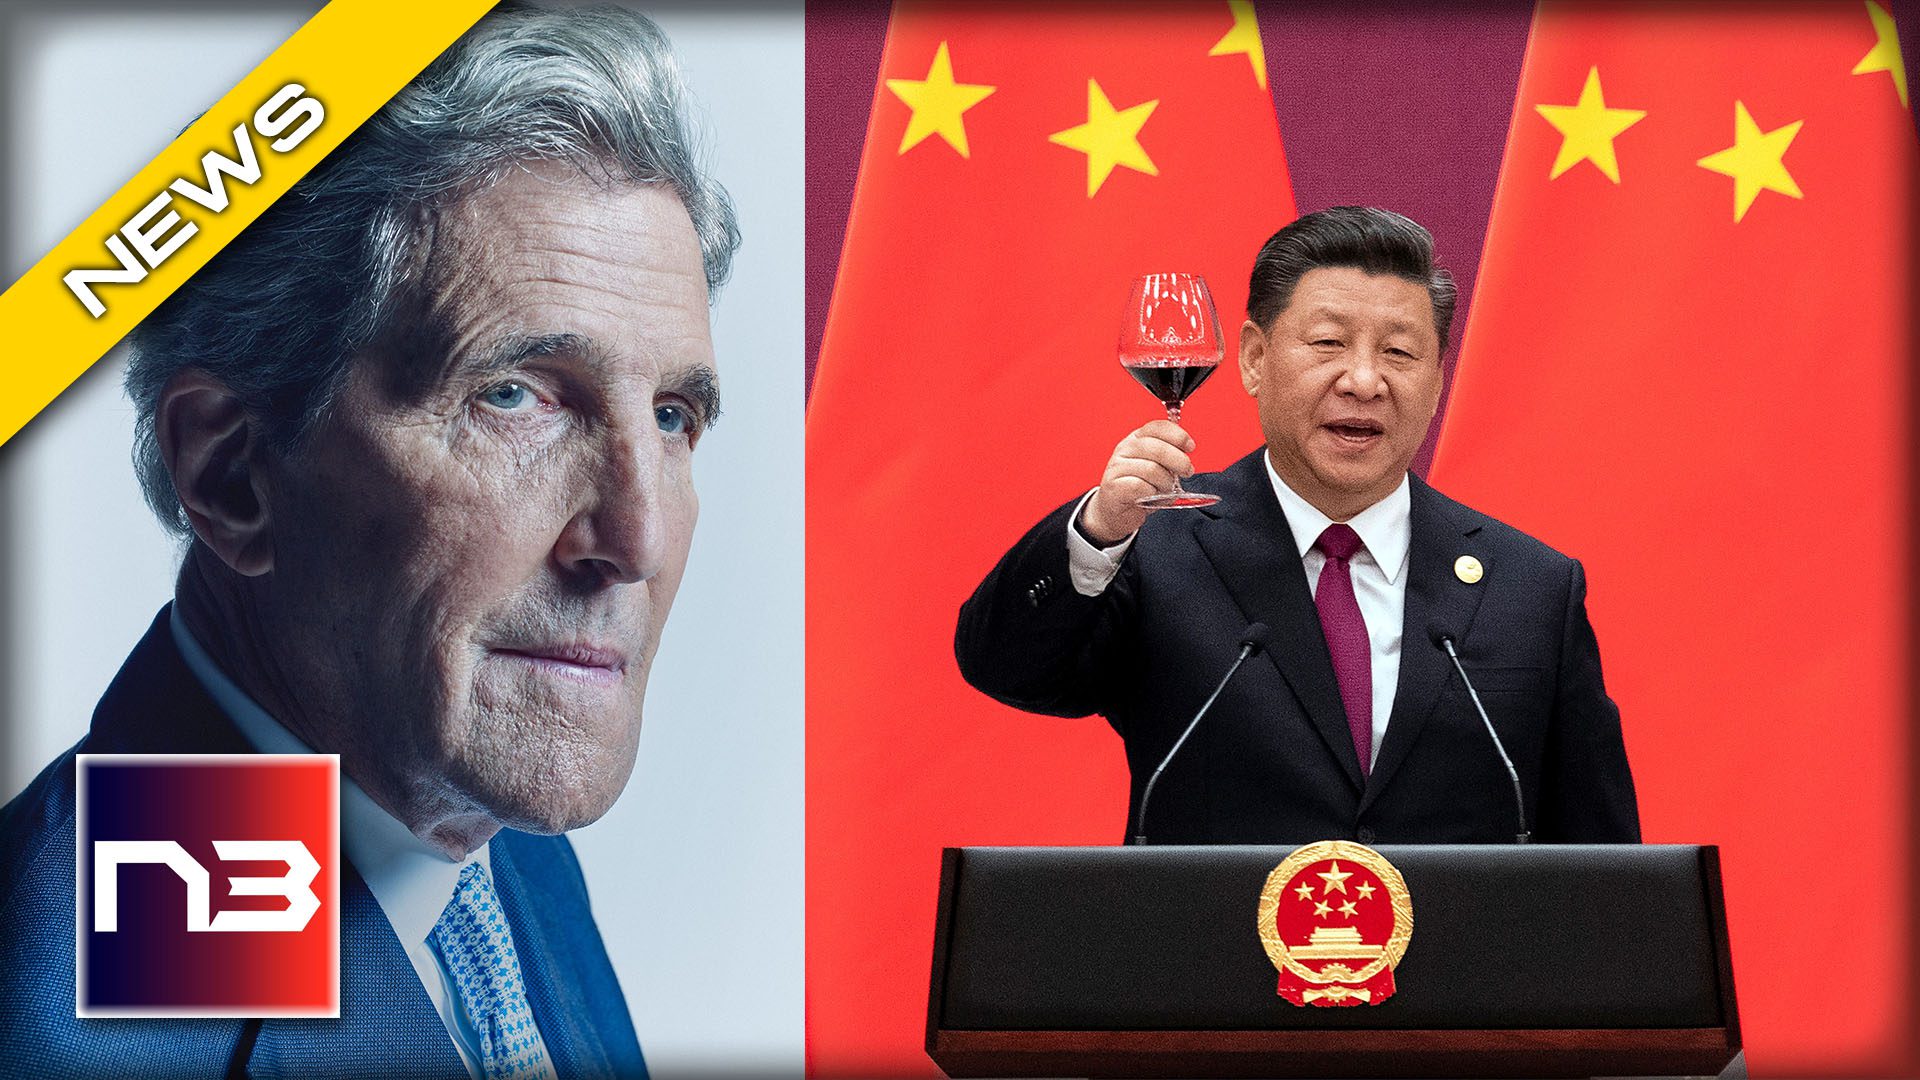 nextnewsnetwork.com - Next News Network Team - GOT NUKES? Biden Warns of Nuclear Threat So John Kerry Runs To China to Chat About Climate Instead